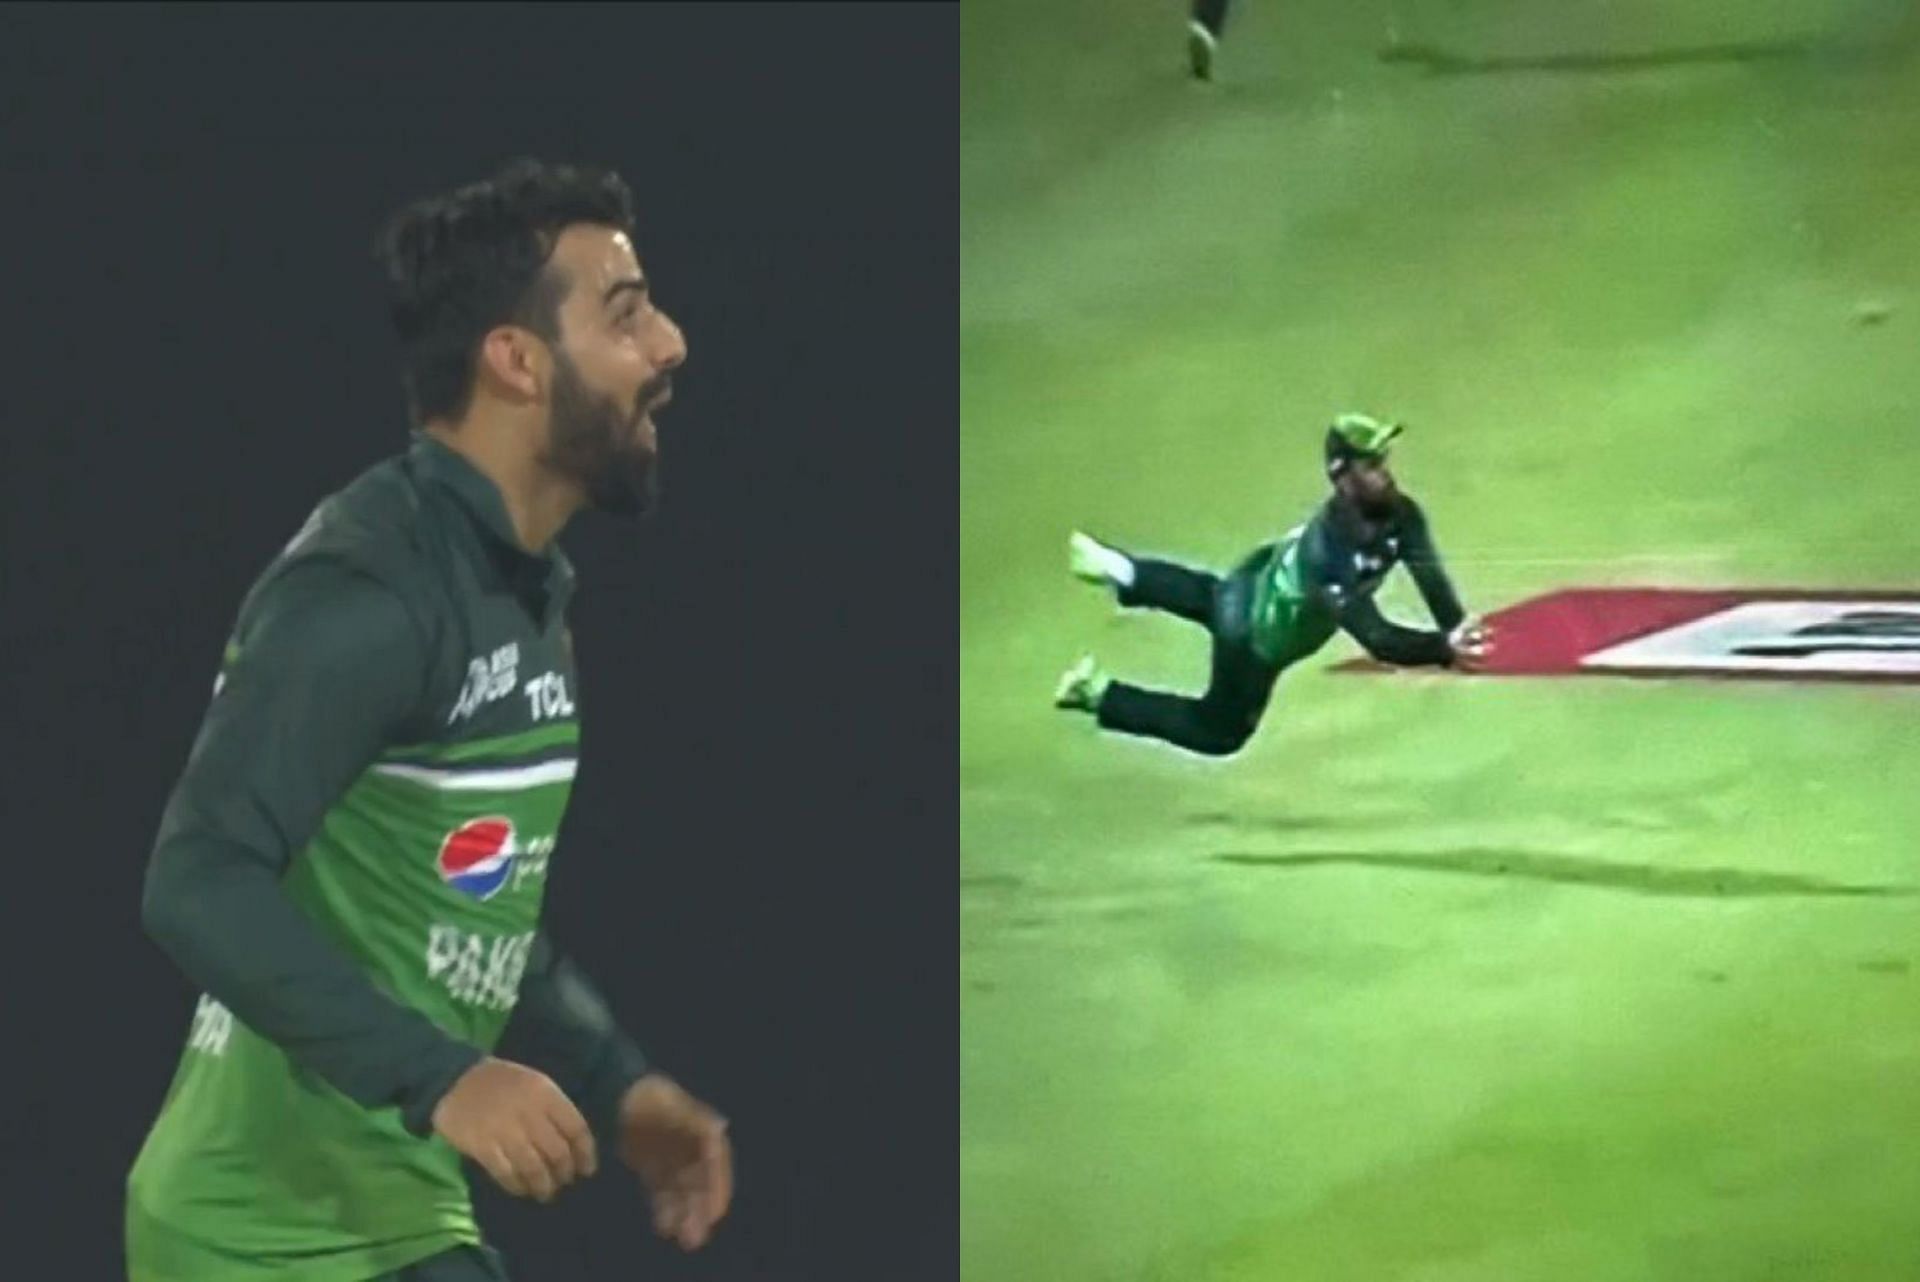 Shadab Khan in awe of Fakhar Zaman as he finished a magnificent catch. 